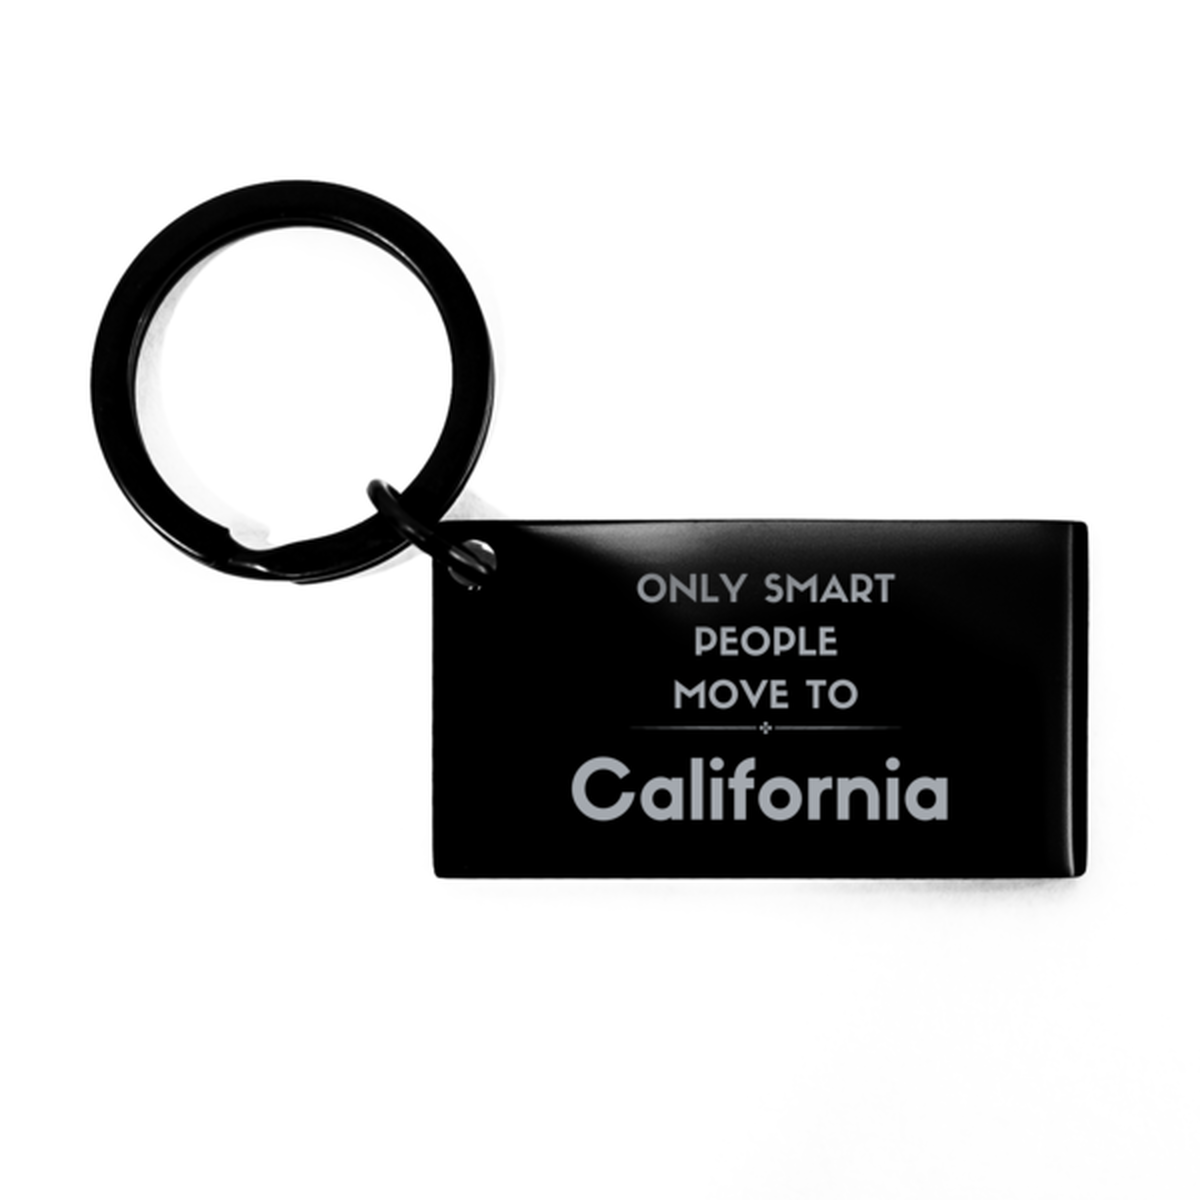 Only smart people move to California Keychain, Gag Gifts For California, Move to California Gifts for Friends Coworker Funny Saying Quote